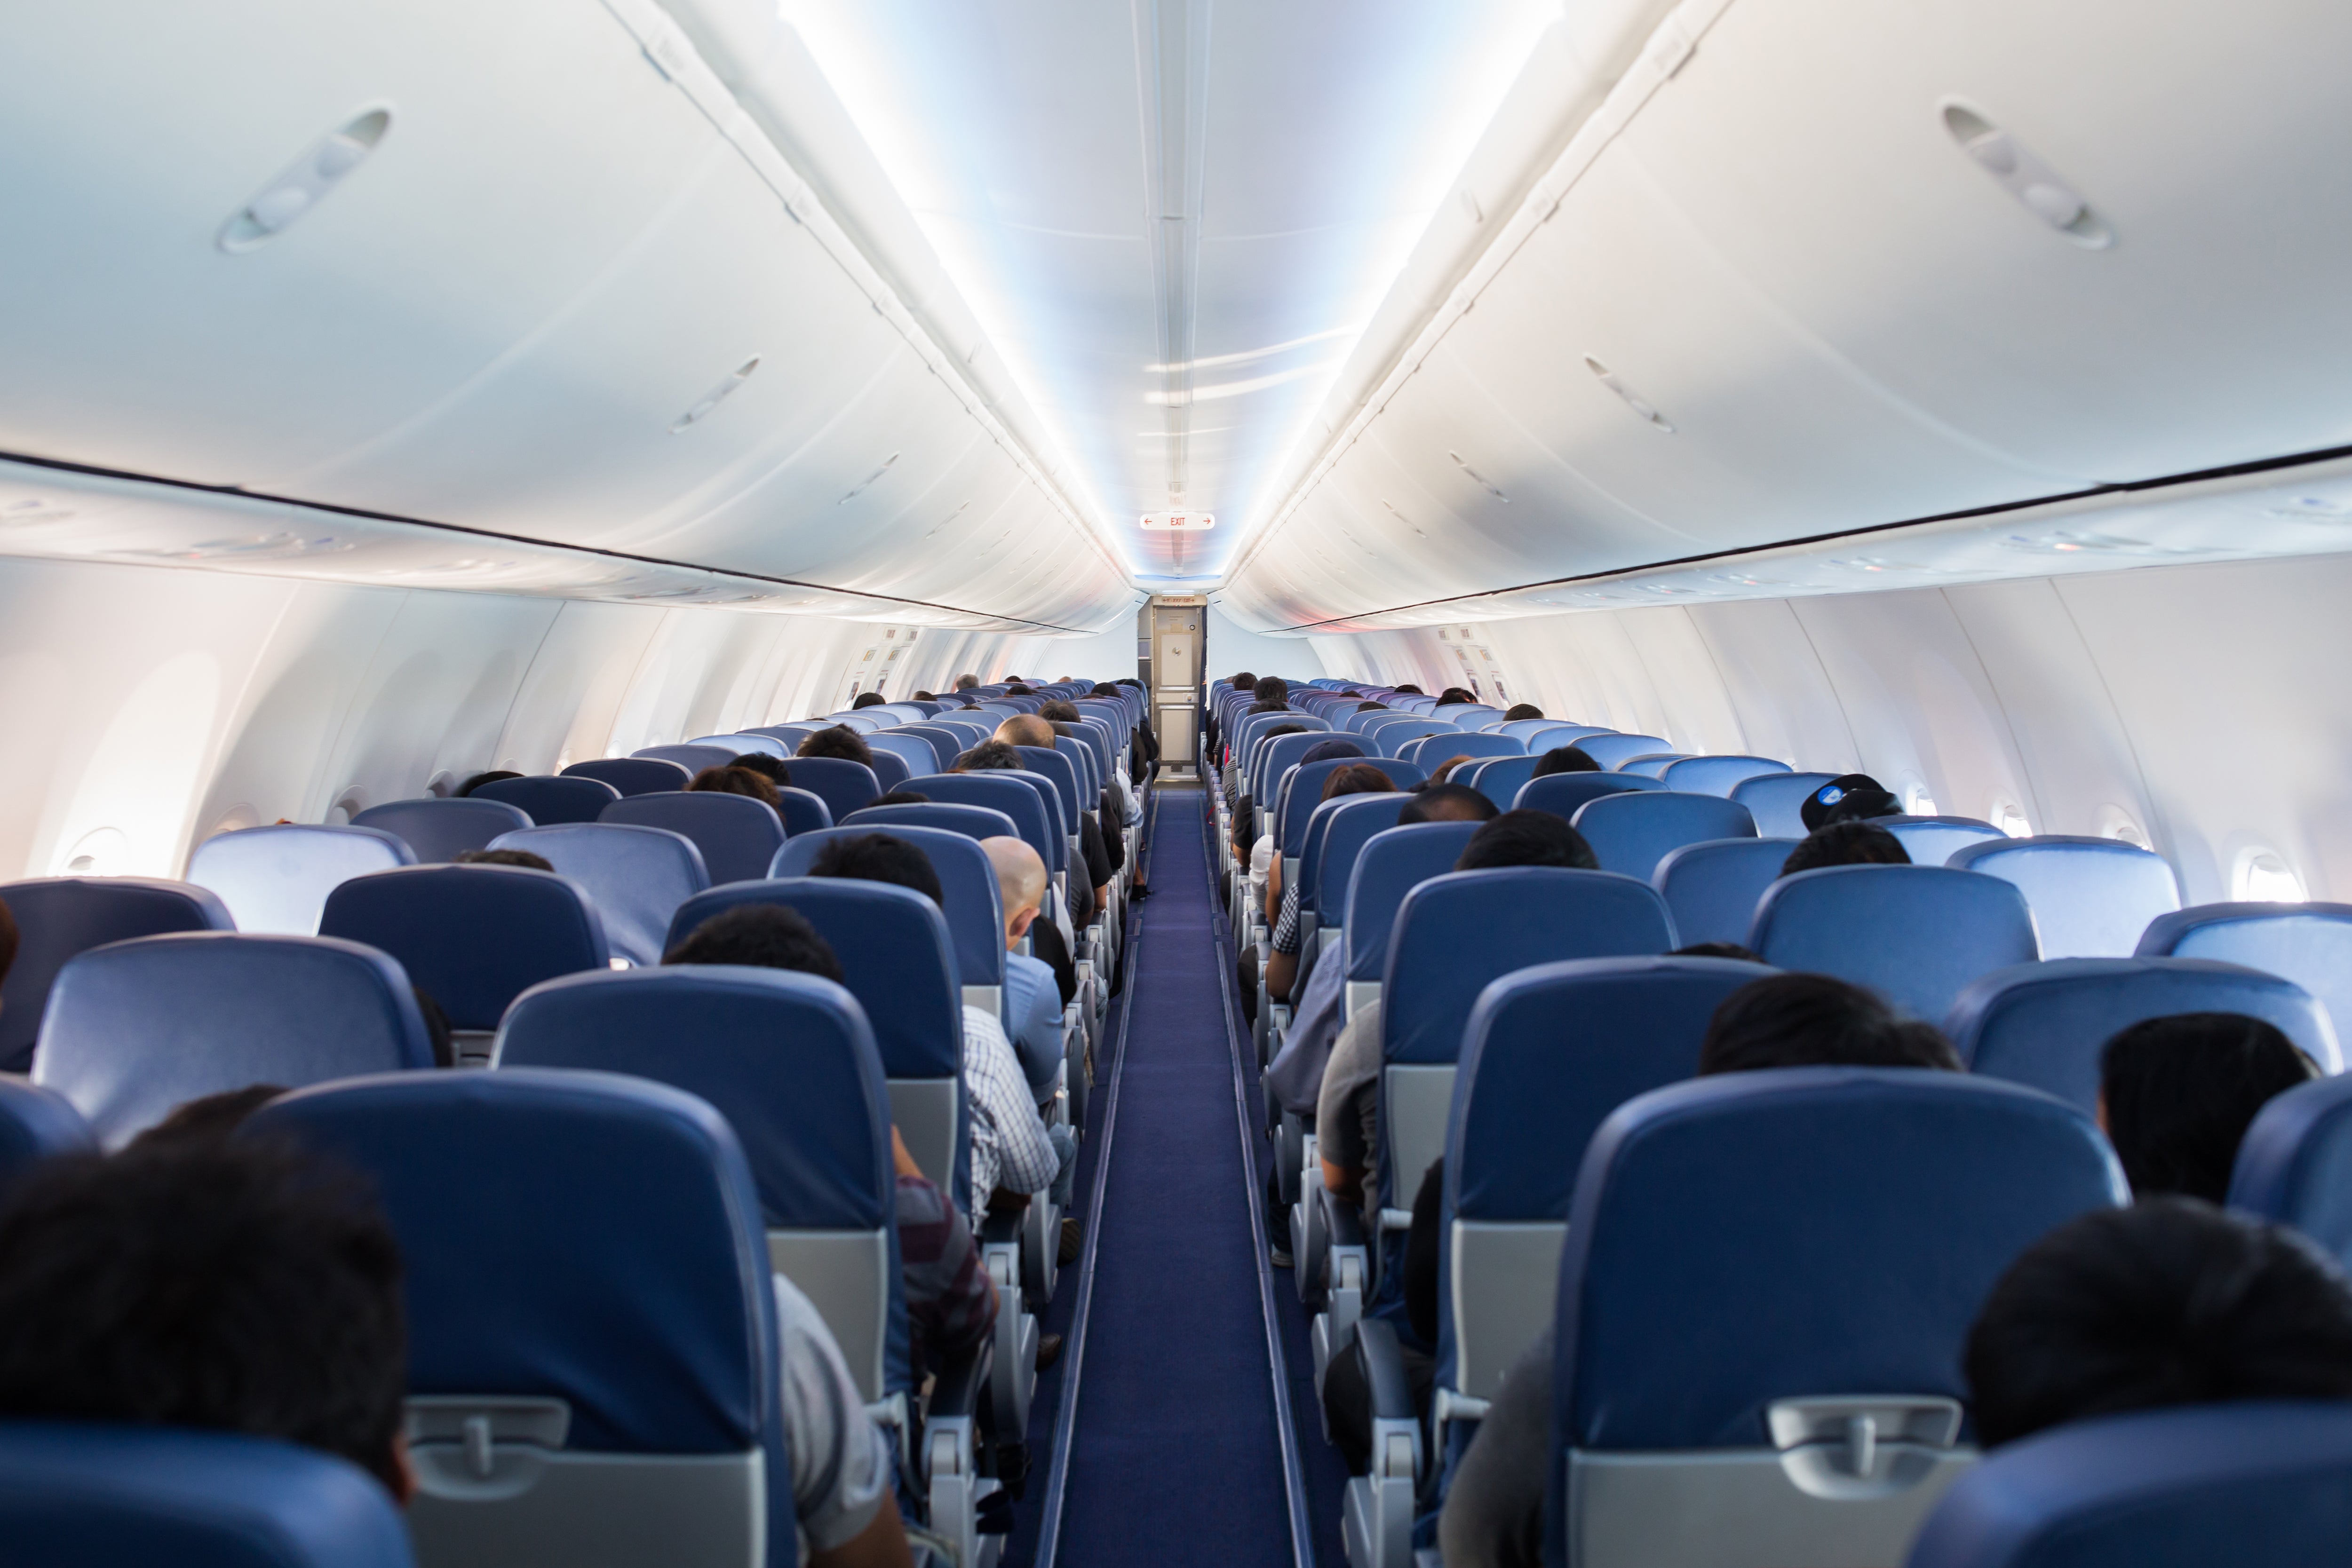 Spitting, Head-Butts, Hug Attacks: Unruly Airplane Passengers Hit With Largest Fines Ever